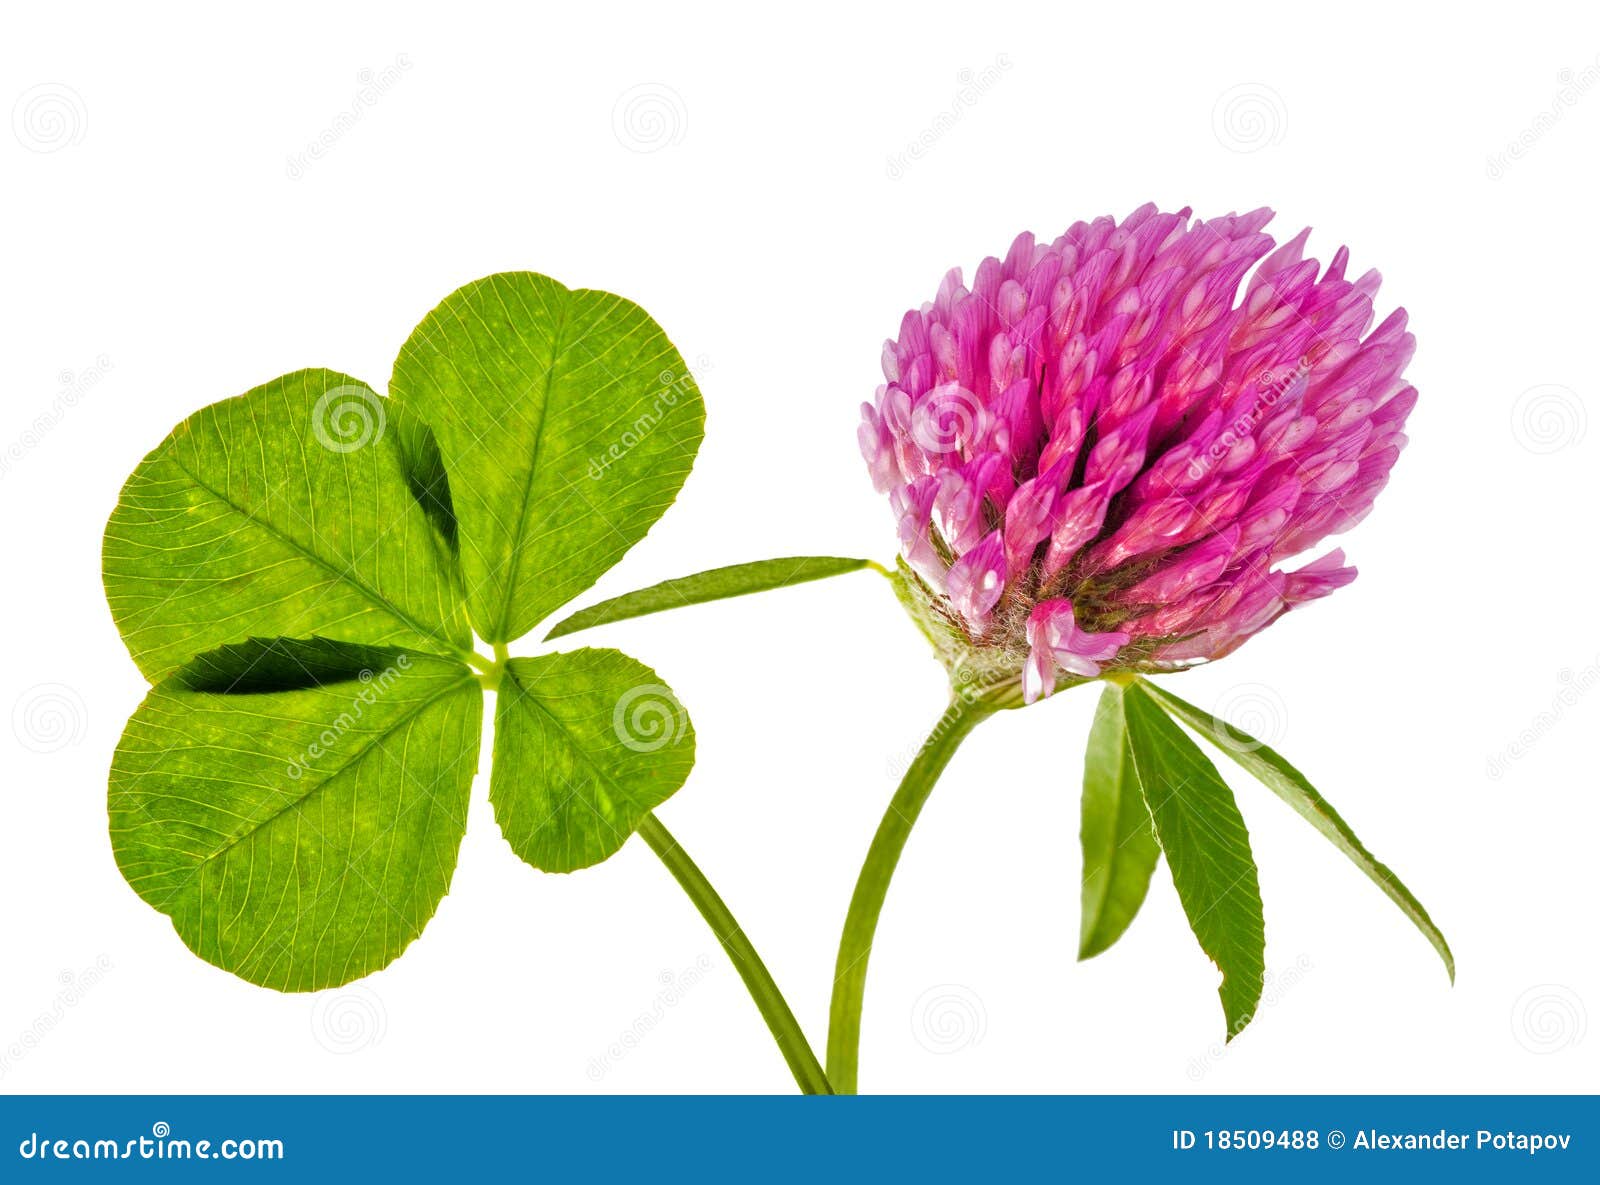 royalty free stock photos four element clover leaf pink flower image